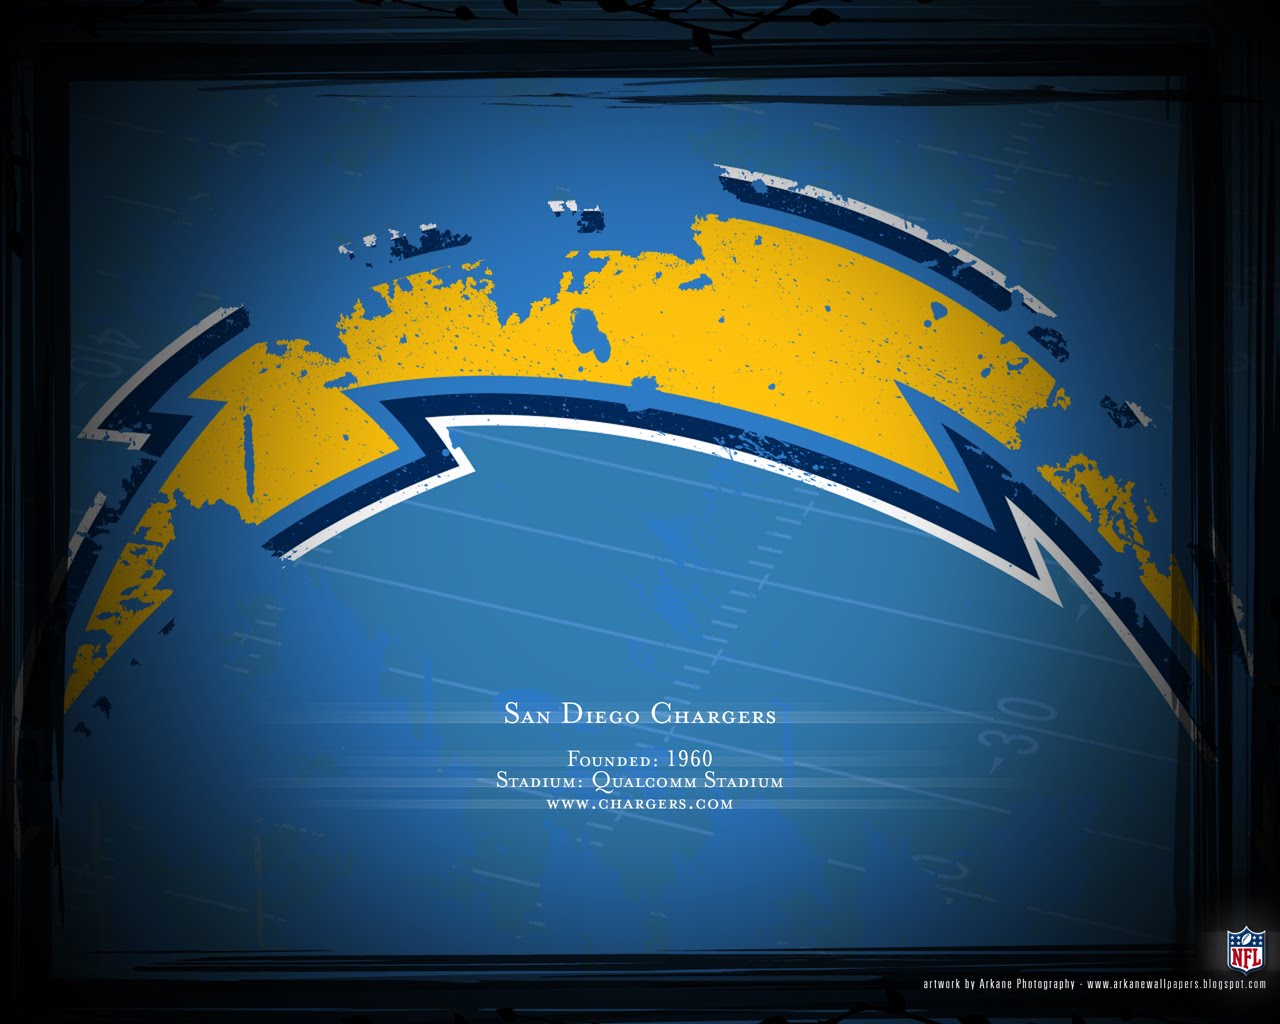 San Diego Chargers Computer Wallpapers Desktop Backgrounds 1280x1024